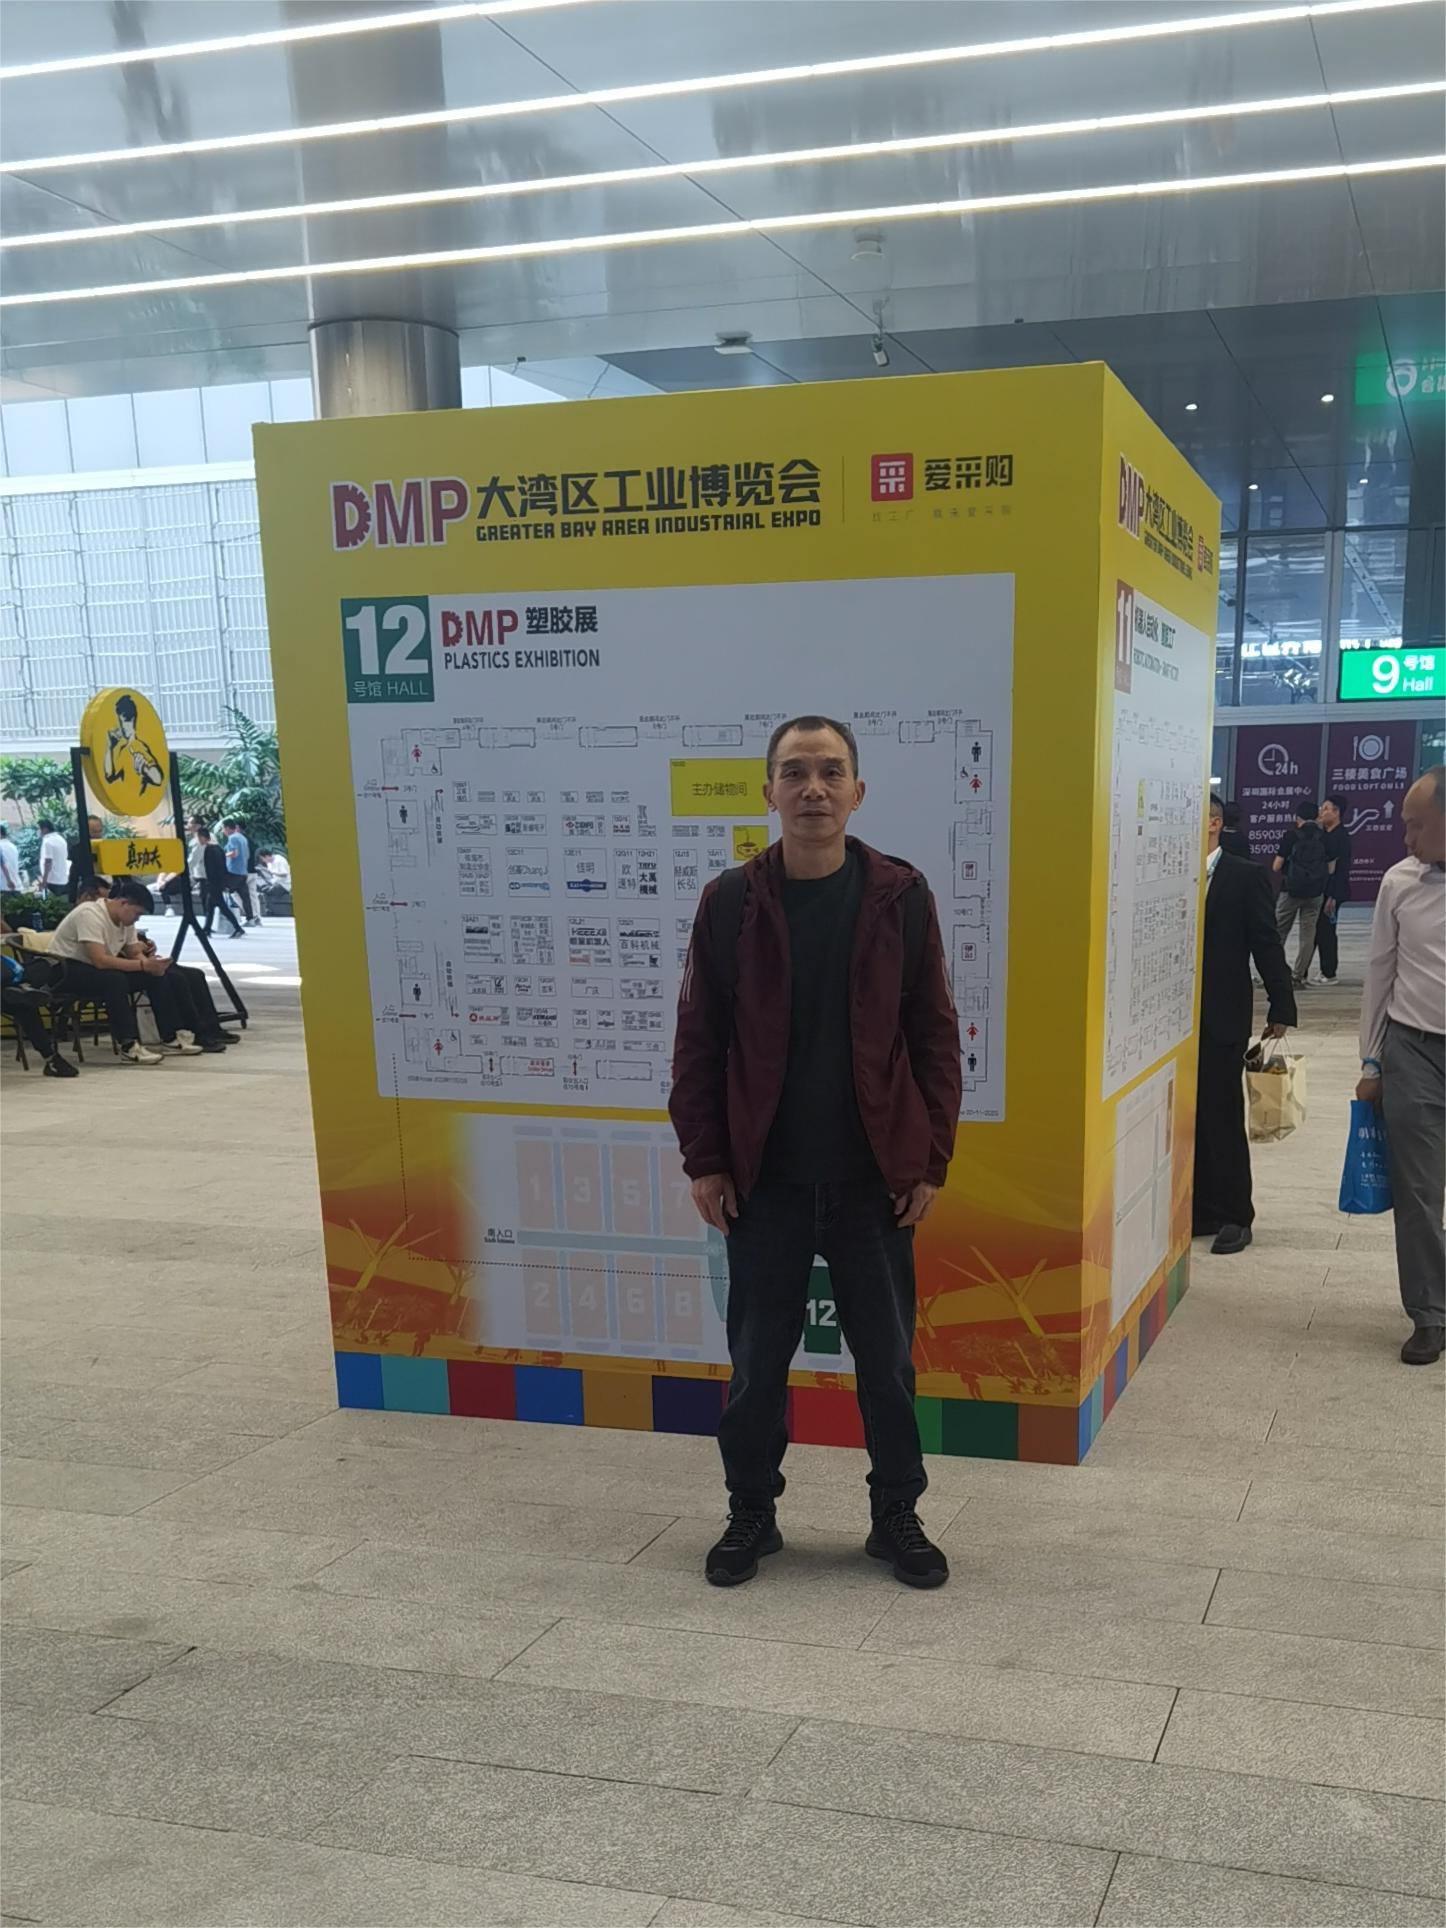 Mr. Li participated in the 2023 DMP GREATER BAY AREA INDUSTRIAL EXPO in Shenzhen